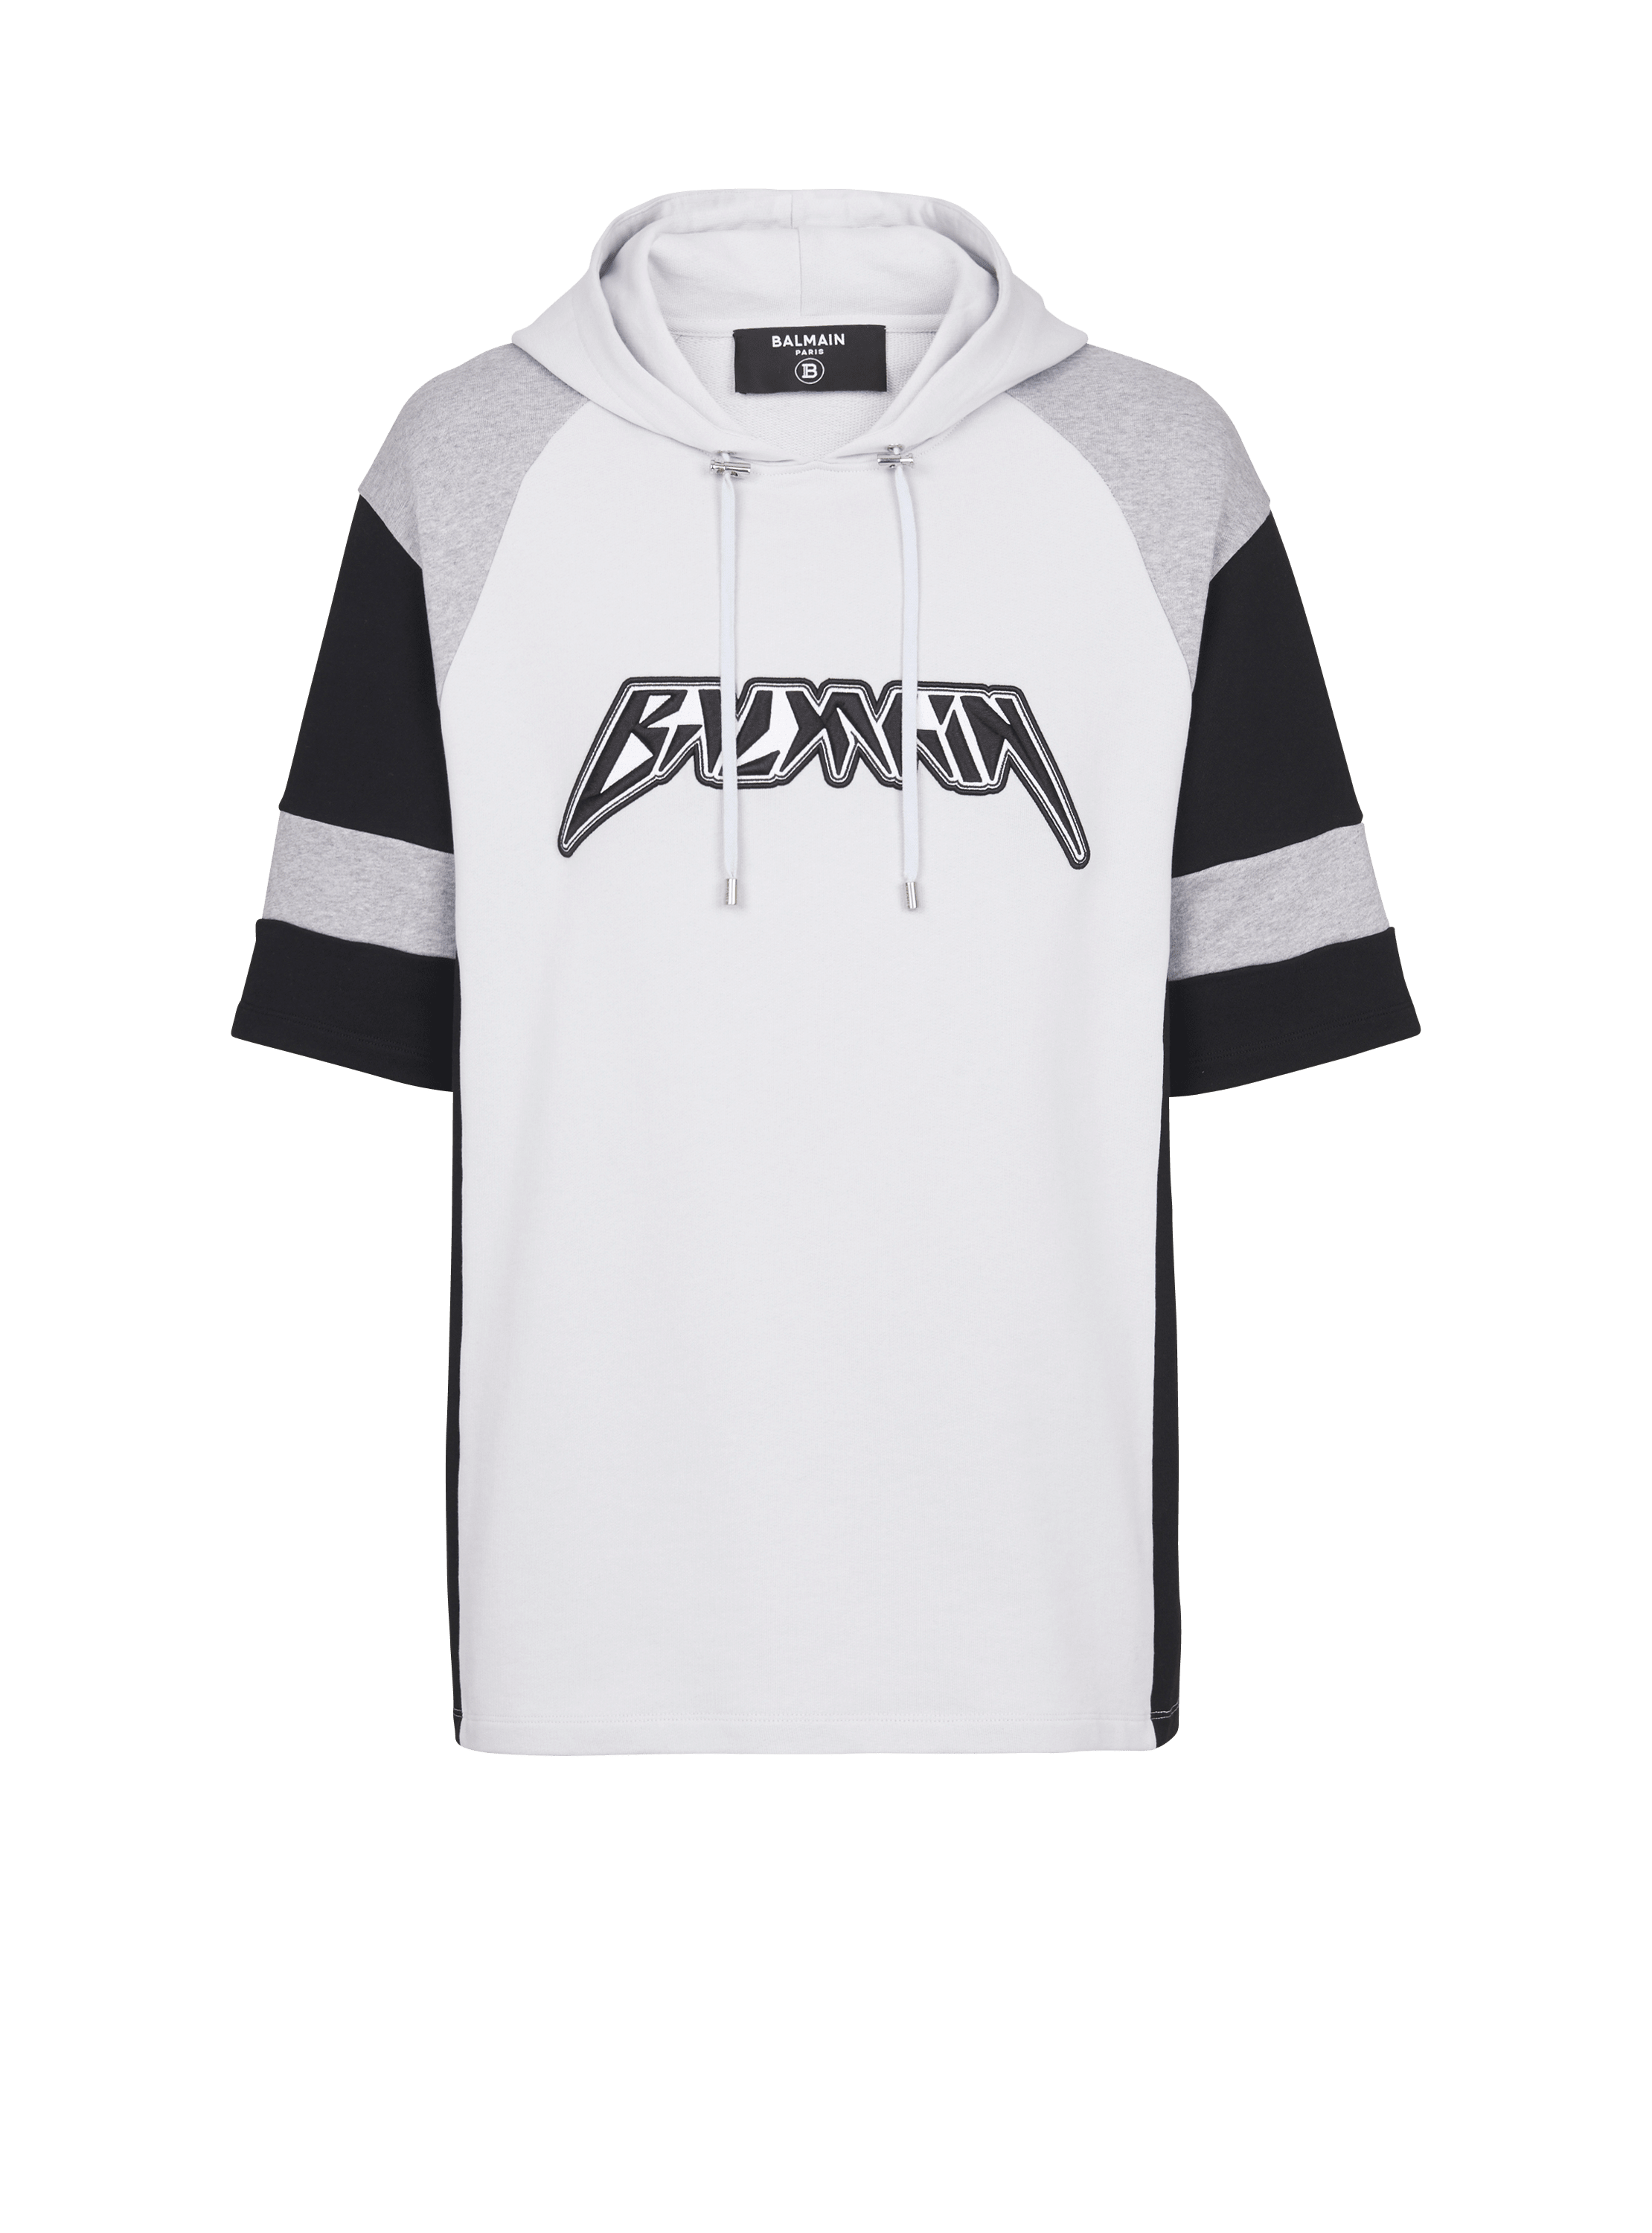 Oversized cotton hoodie with embroidered Balmain logo, grey, hi-res